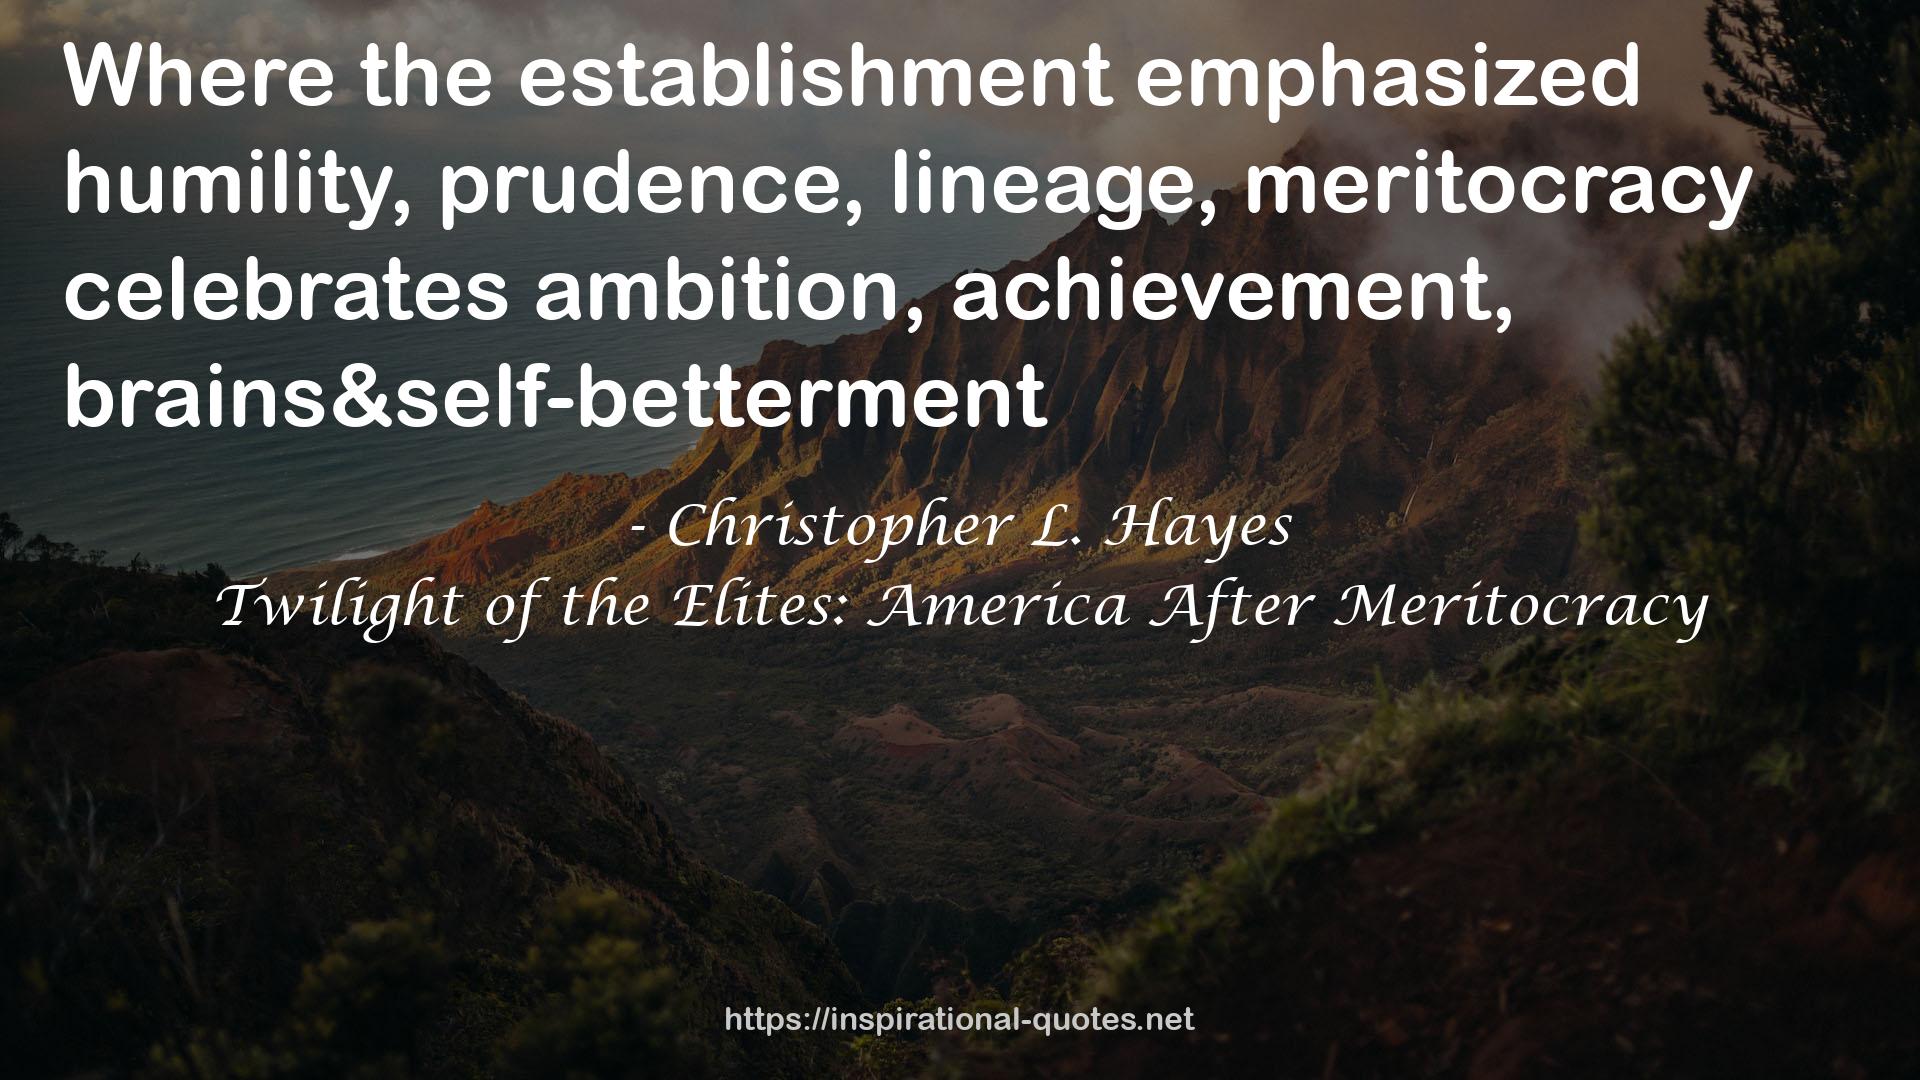 Christopher L. Hayes QUOTES